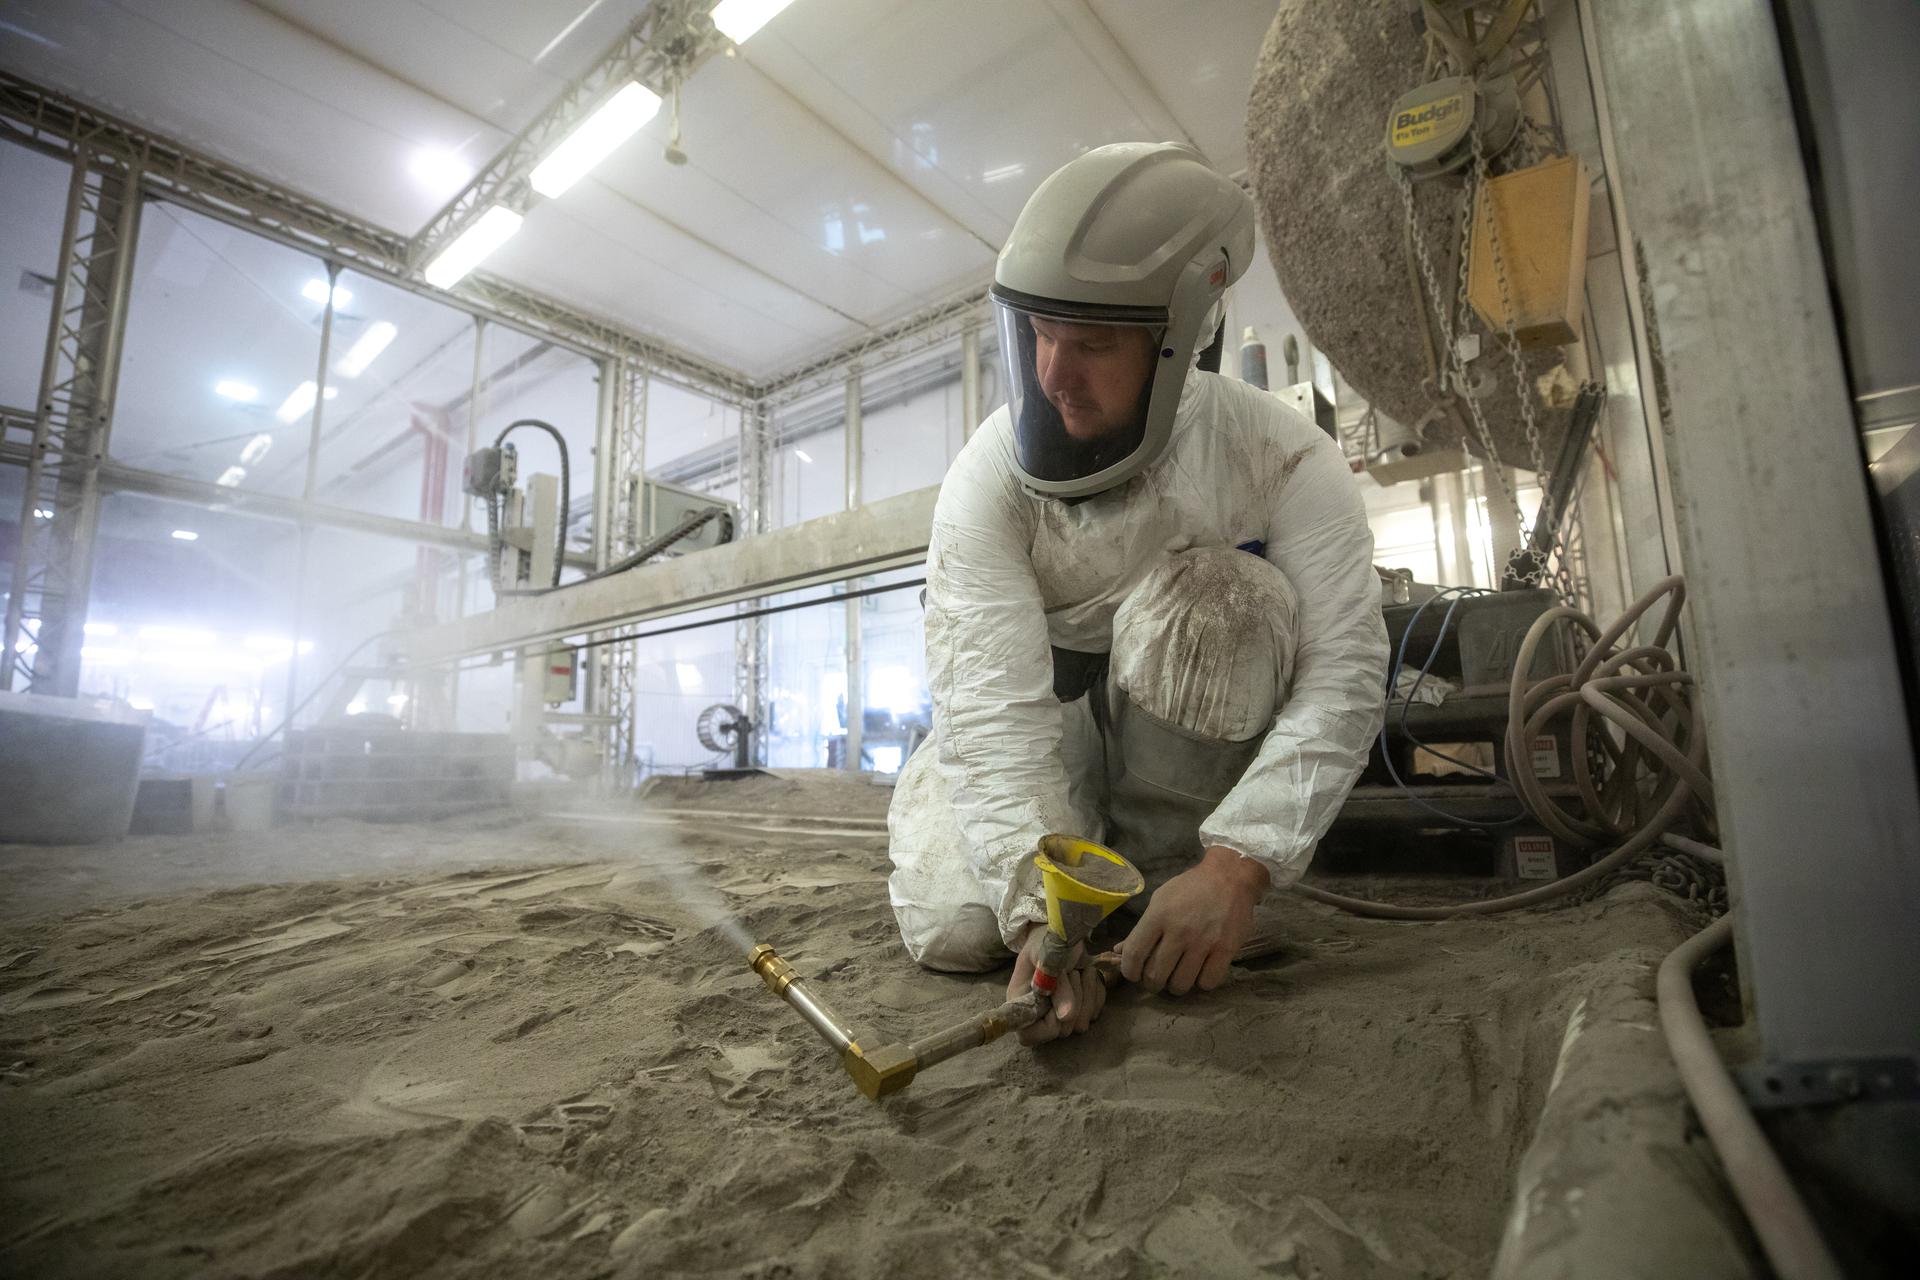 Austin Langton, a researcher at NASA's Kennedy Space Center in Florida, creates a fine spray of the regolith simulant BP-1, to perform testing with a Millimeter Wave Doppler Radar at the Granular Mechanics and Regolith Operations Lab on July 16, 2021. 